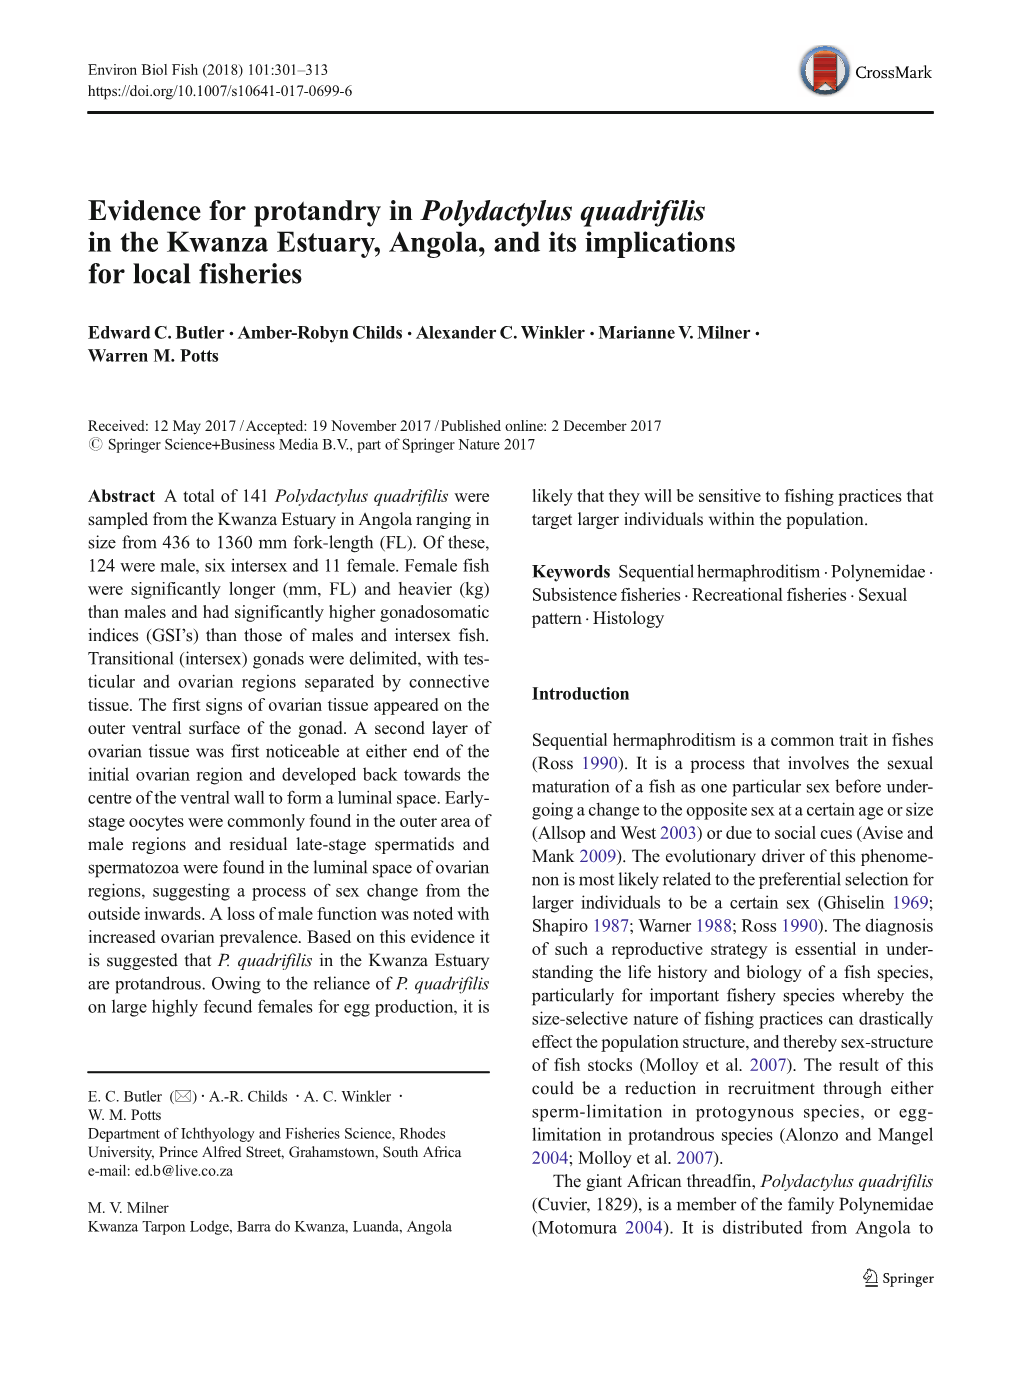 Evidence for Protandry in Polydactylus Quadrifilis in the Kwanza Estuary, Angola, and Its Implications for Local Fisheries